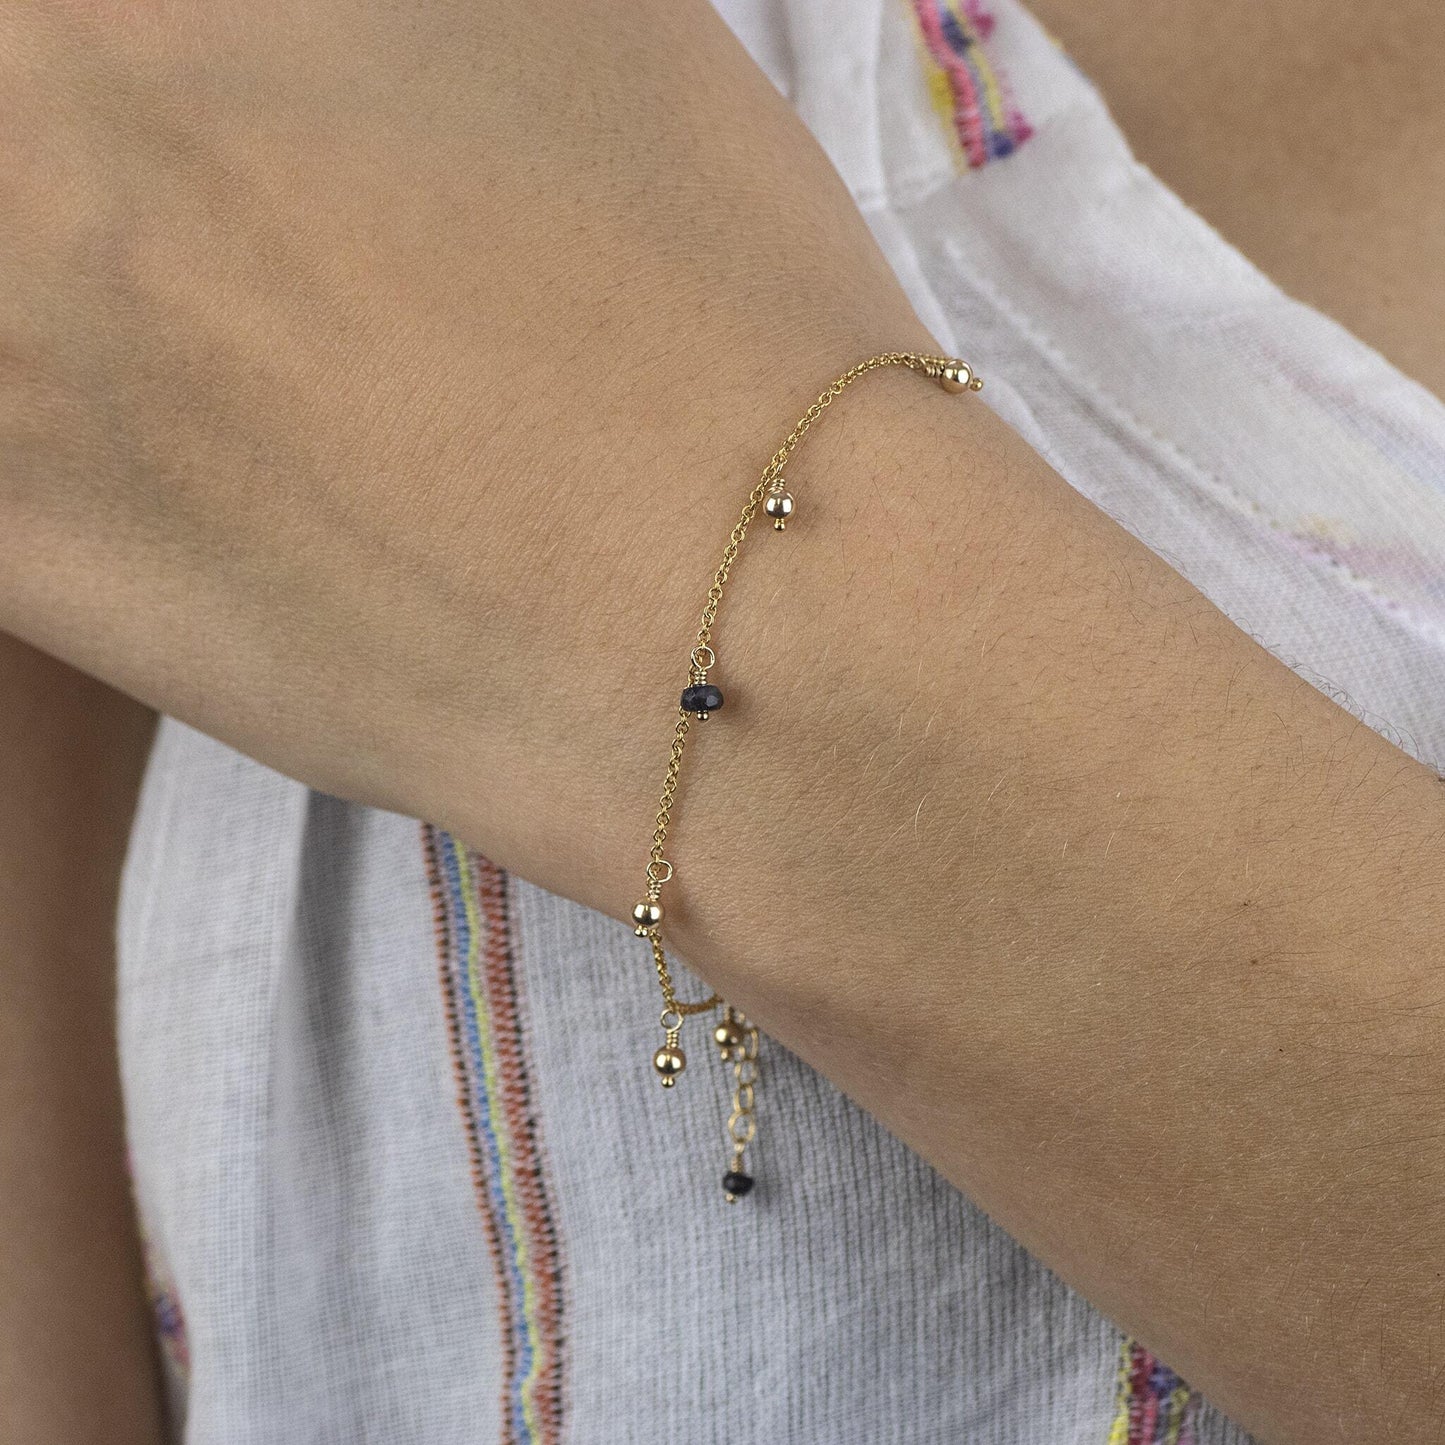 April Birthday Gift - Delicate Double Birthstone Bracelet - Rock Crystal - Silver & Gold